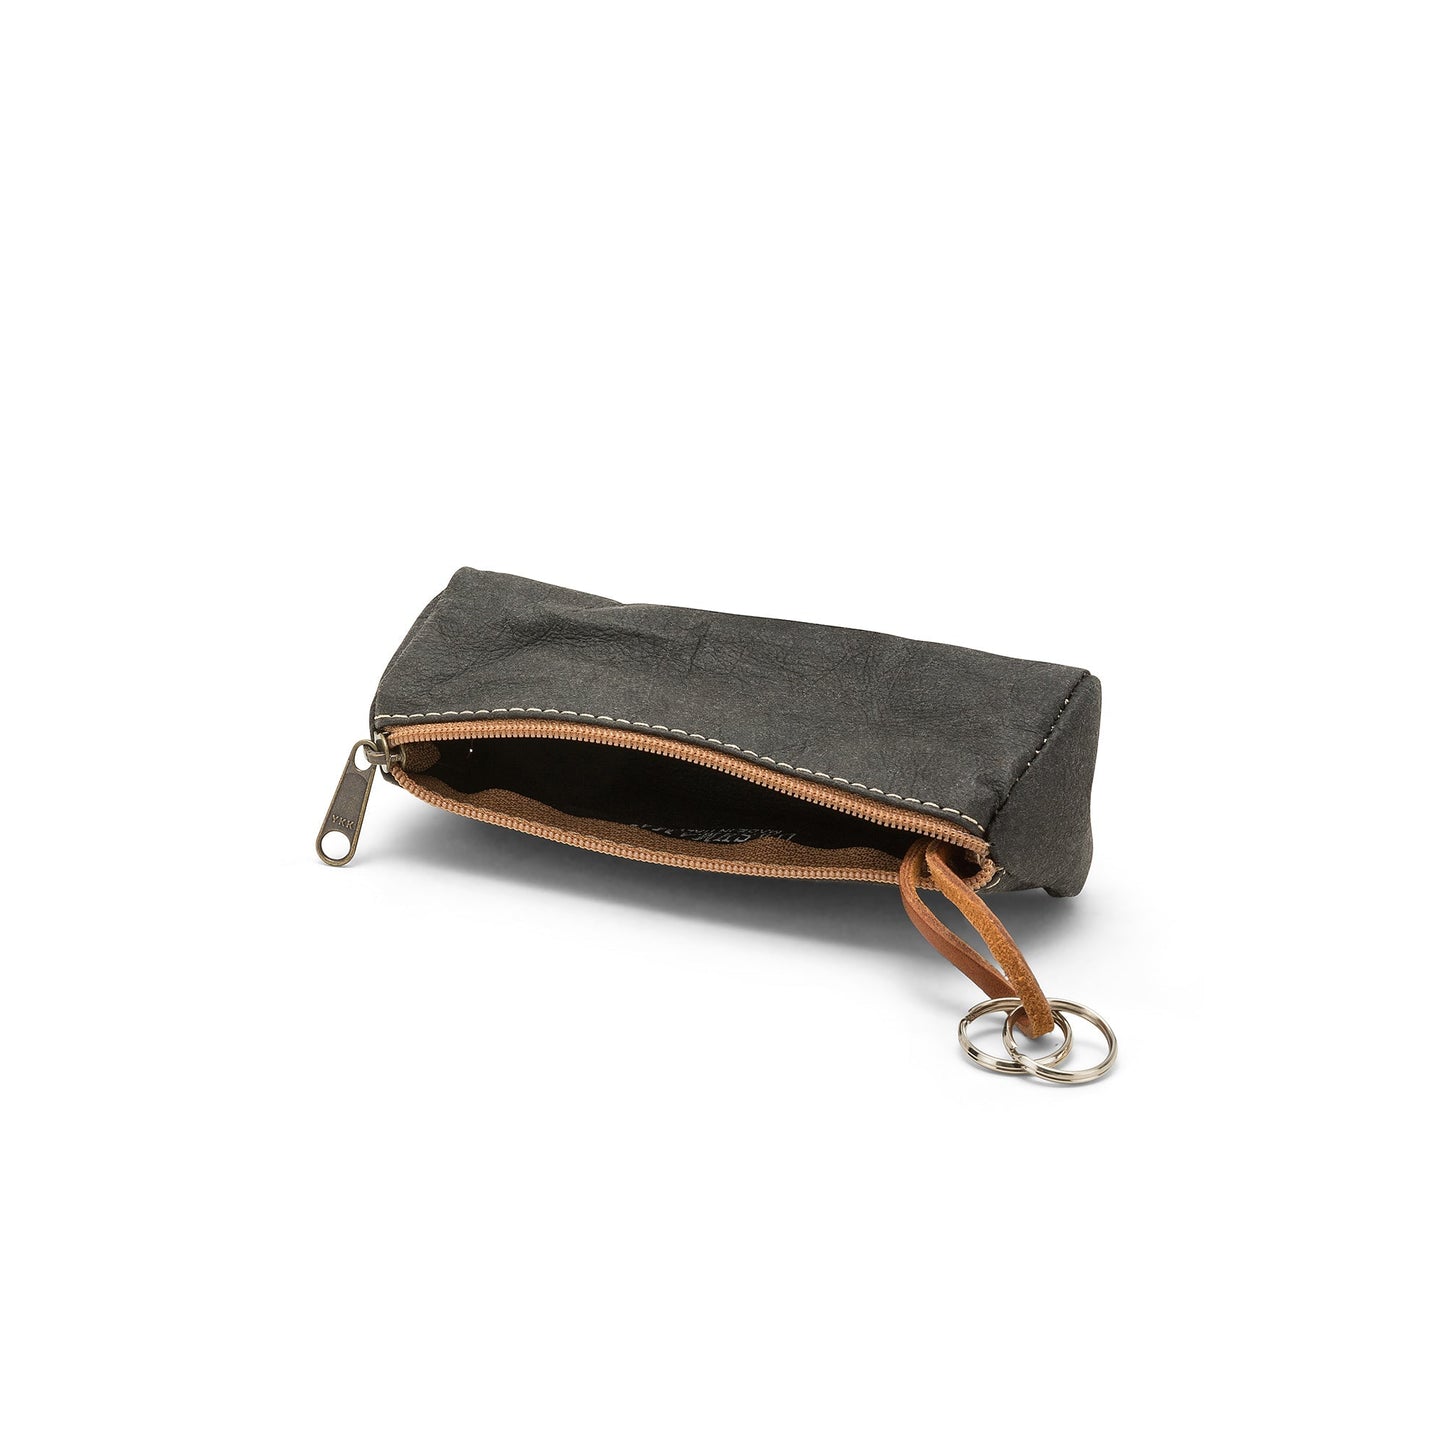 A black washable paper key holder is shown on its side, unzipped.